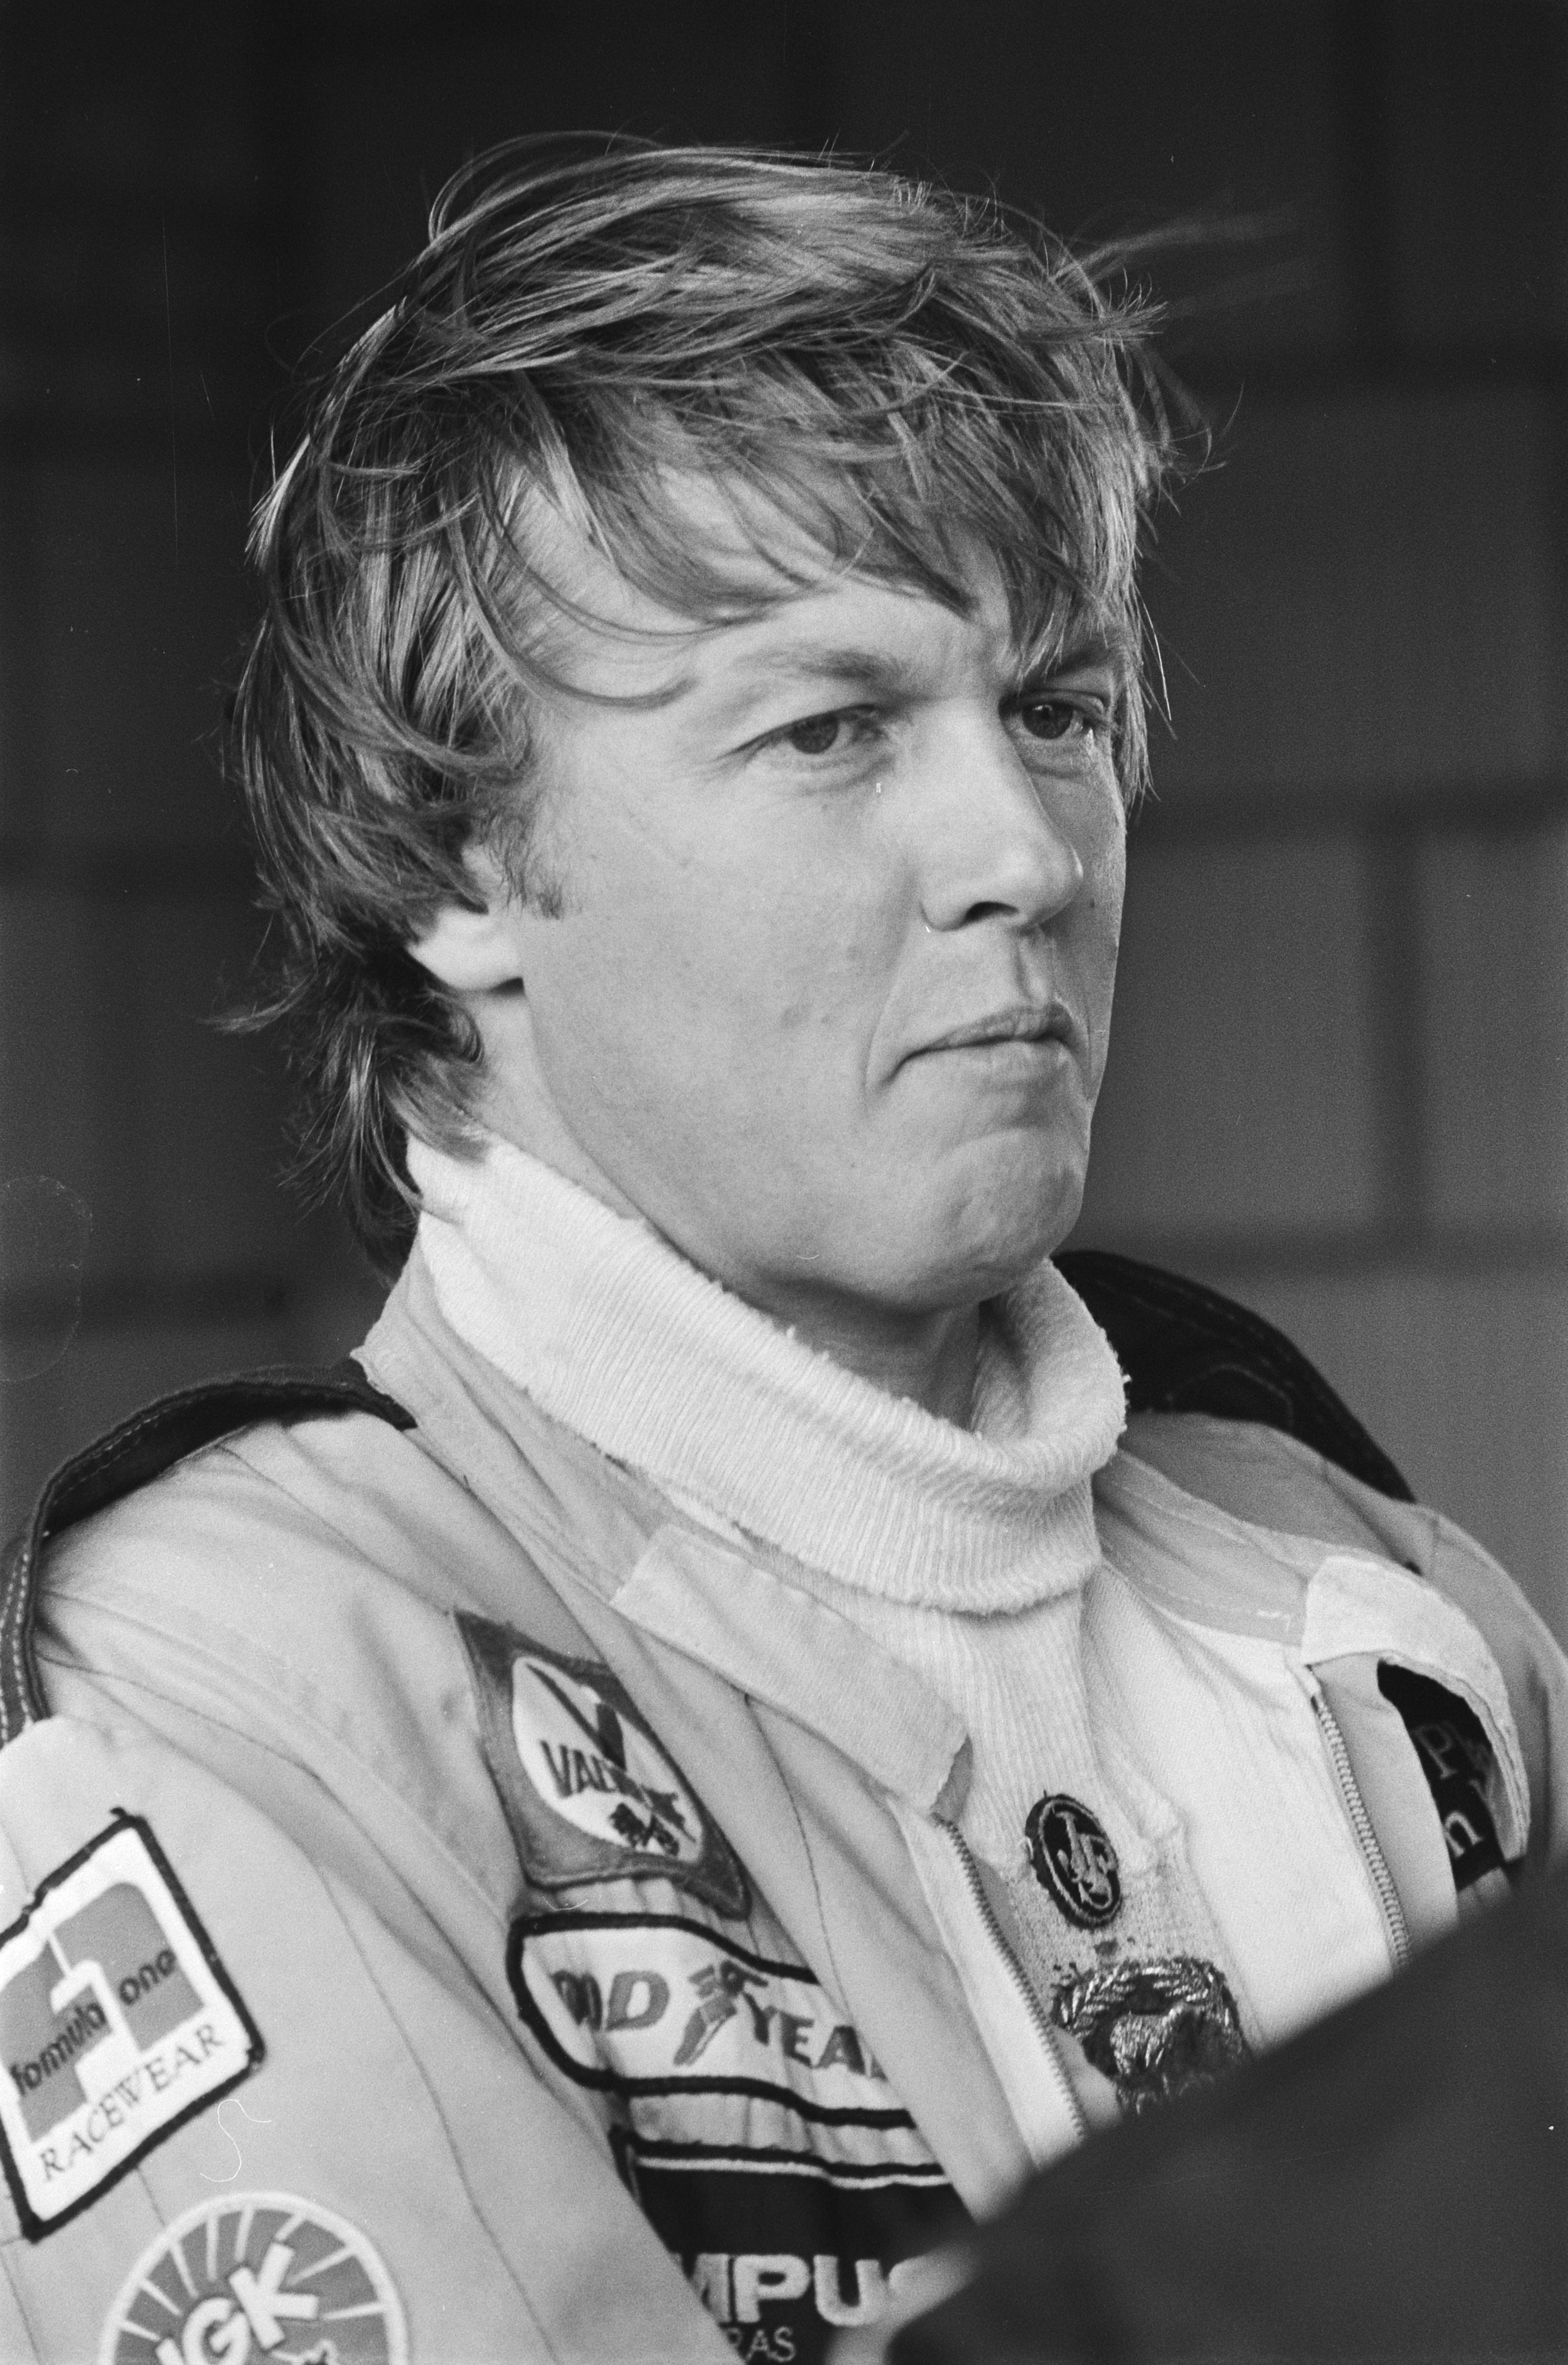 Kdo byl Ronnie Peterson